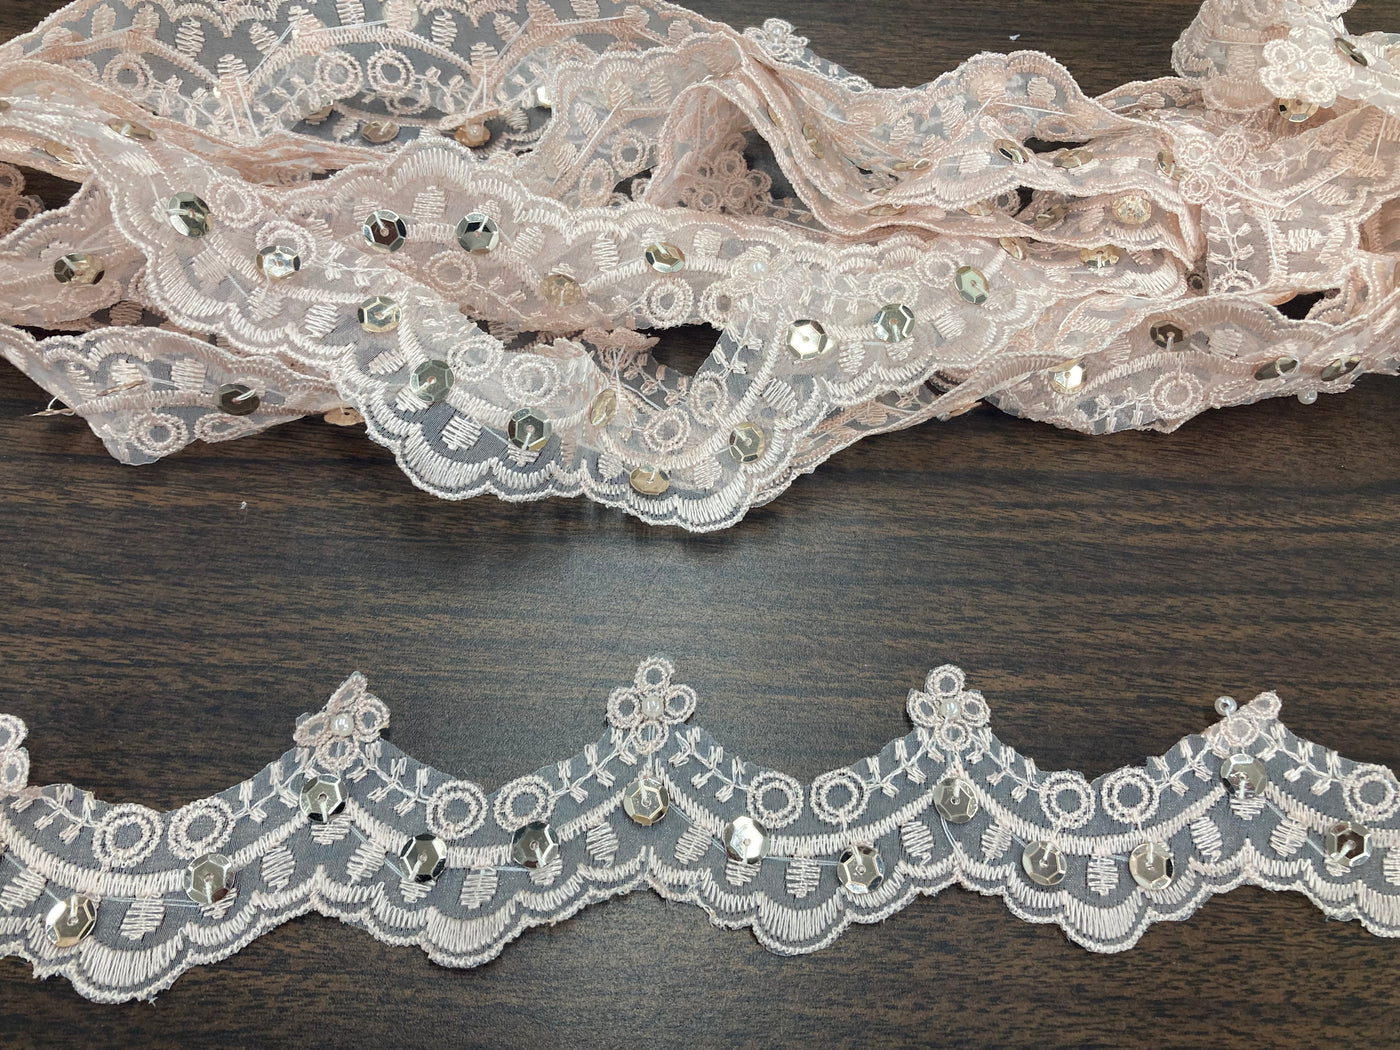 Beaded Blush Lace Trim Embroidered on 100% Polyester Organza . Large Arch Scalloped Trim. Formal Trim. Perfect for Edging and Gowns. Sold by the Yard. Lace Usa